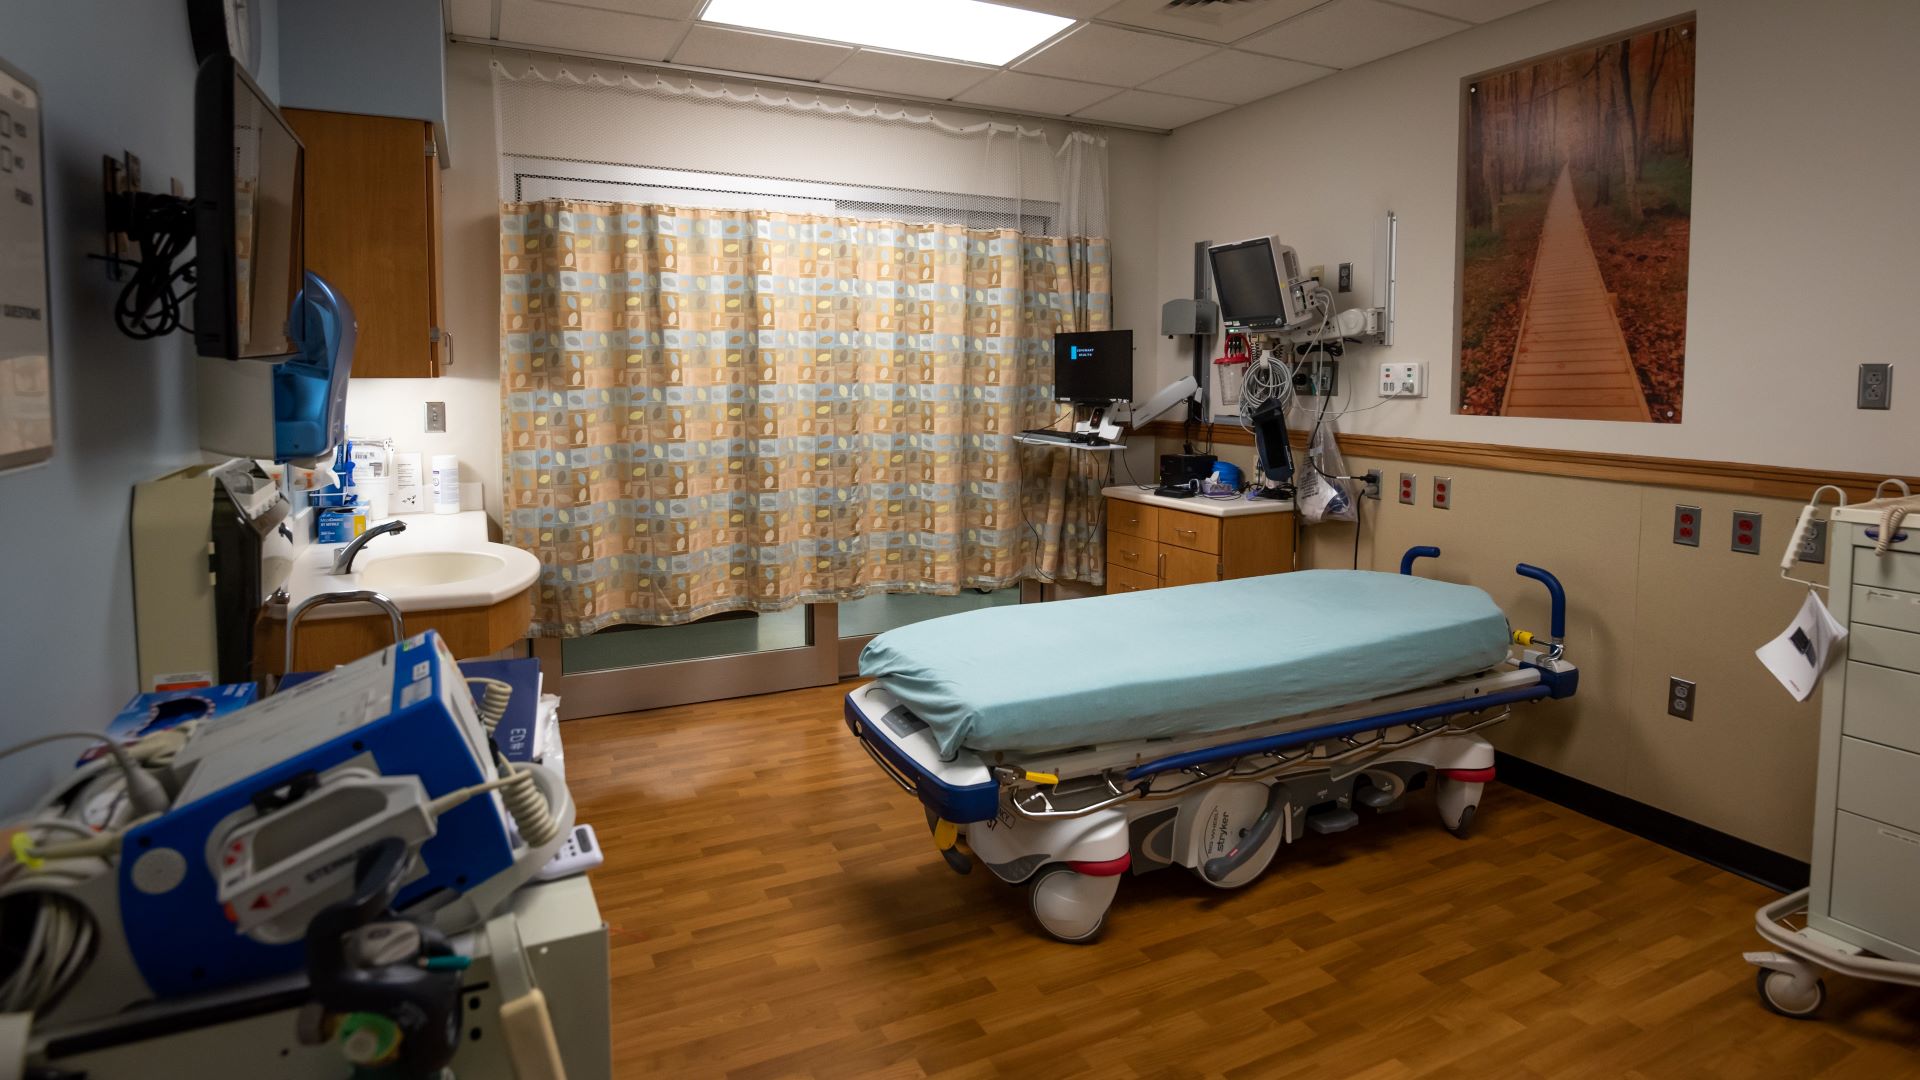 The interior of a room within a nursing home